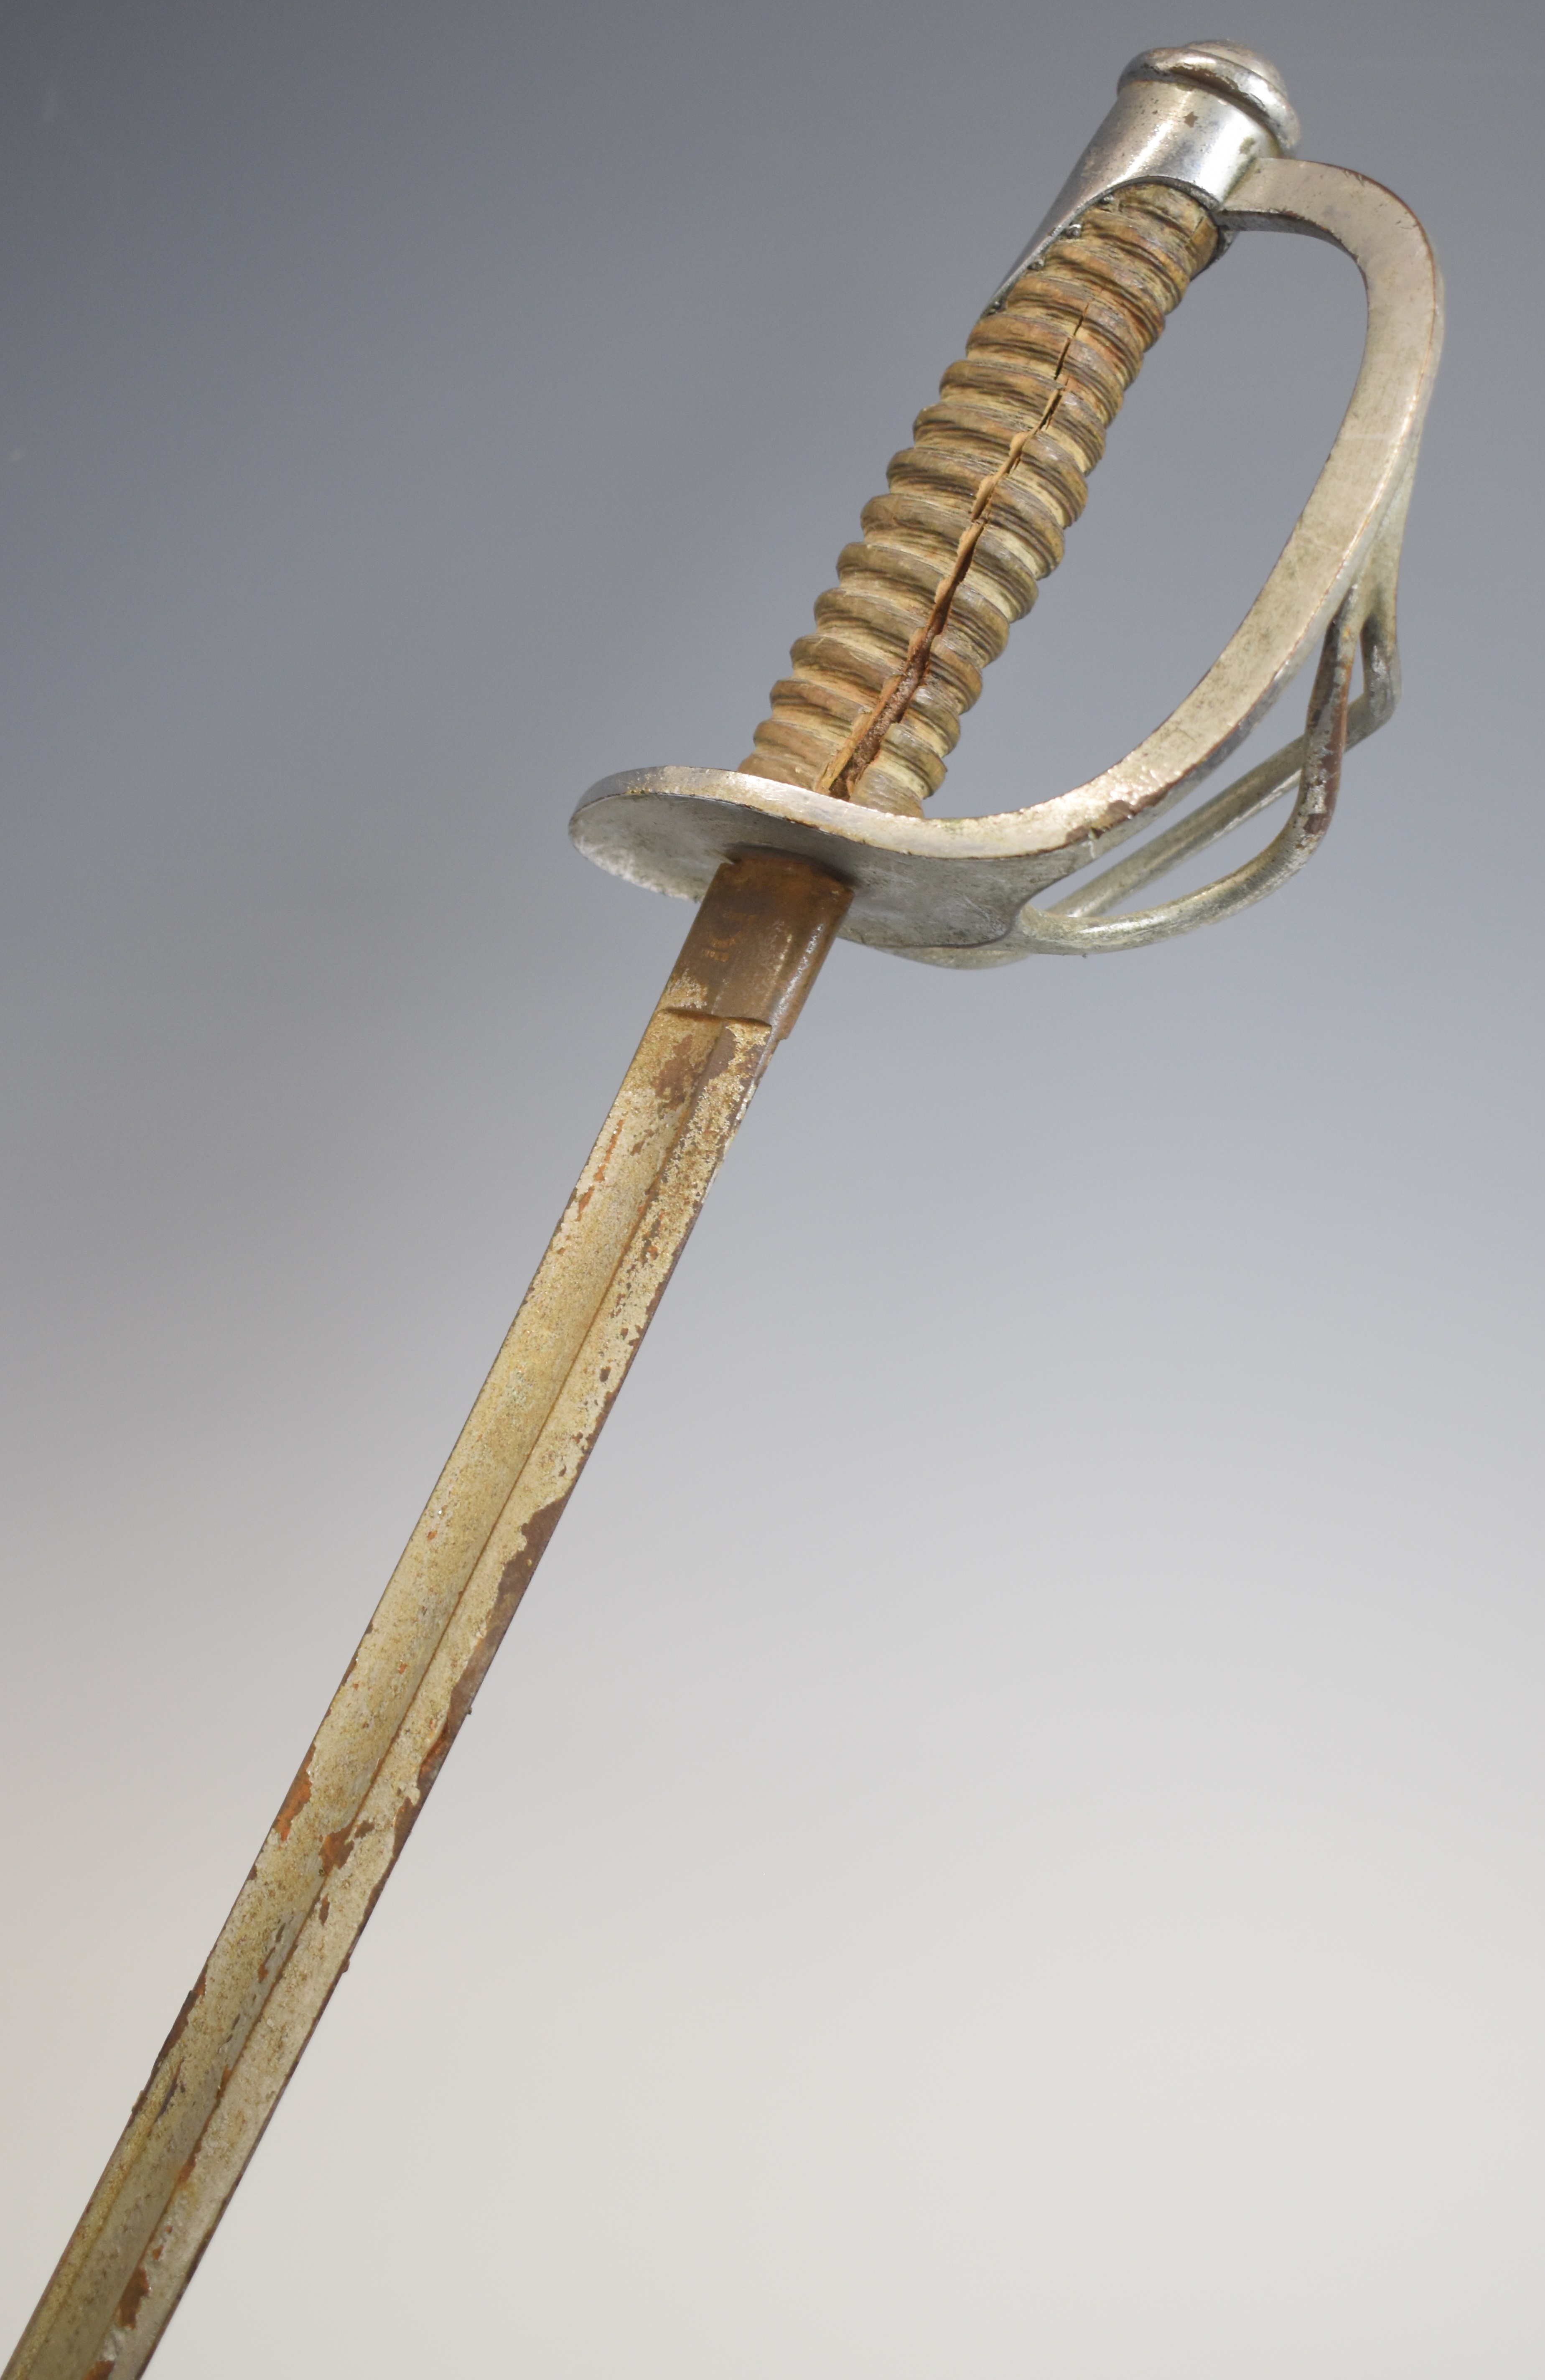 American Civil War sword with wooden grip, two bar hilt, US 1864 AGM to ricasso and Crosby - Image 14 of 26